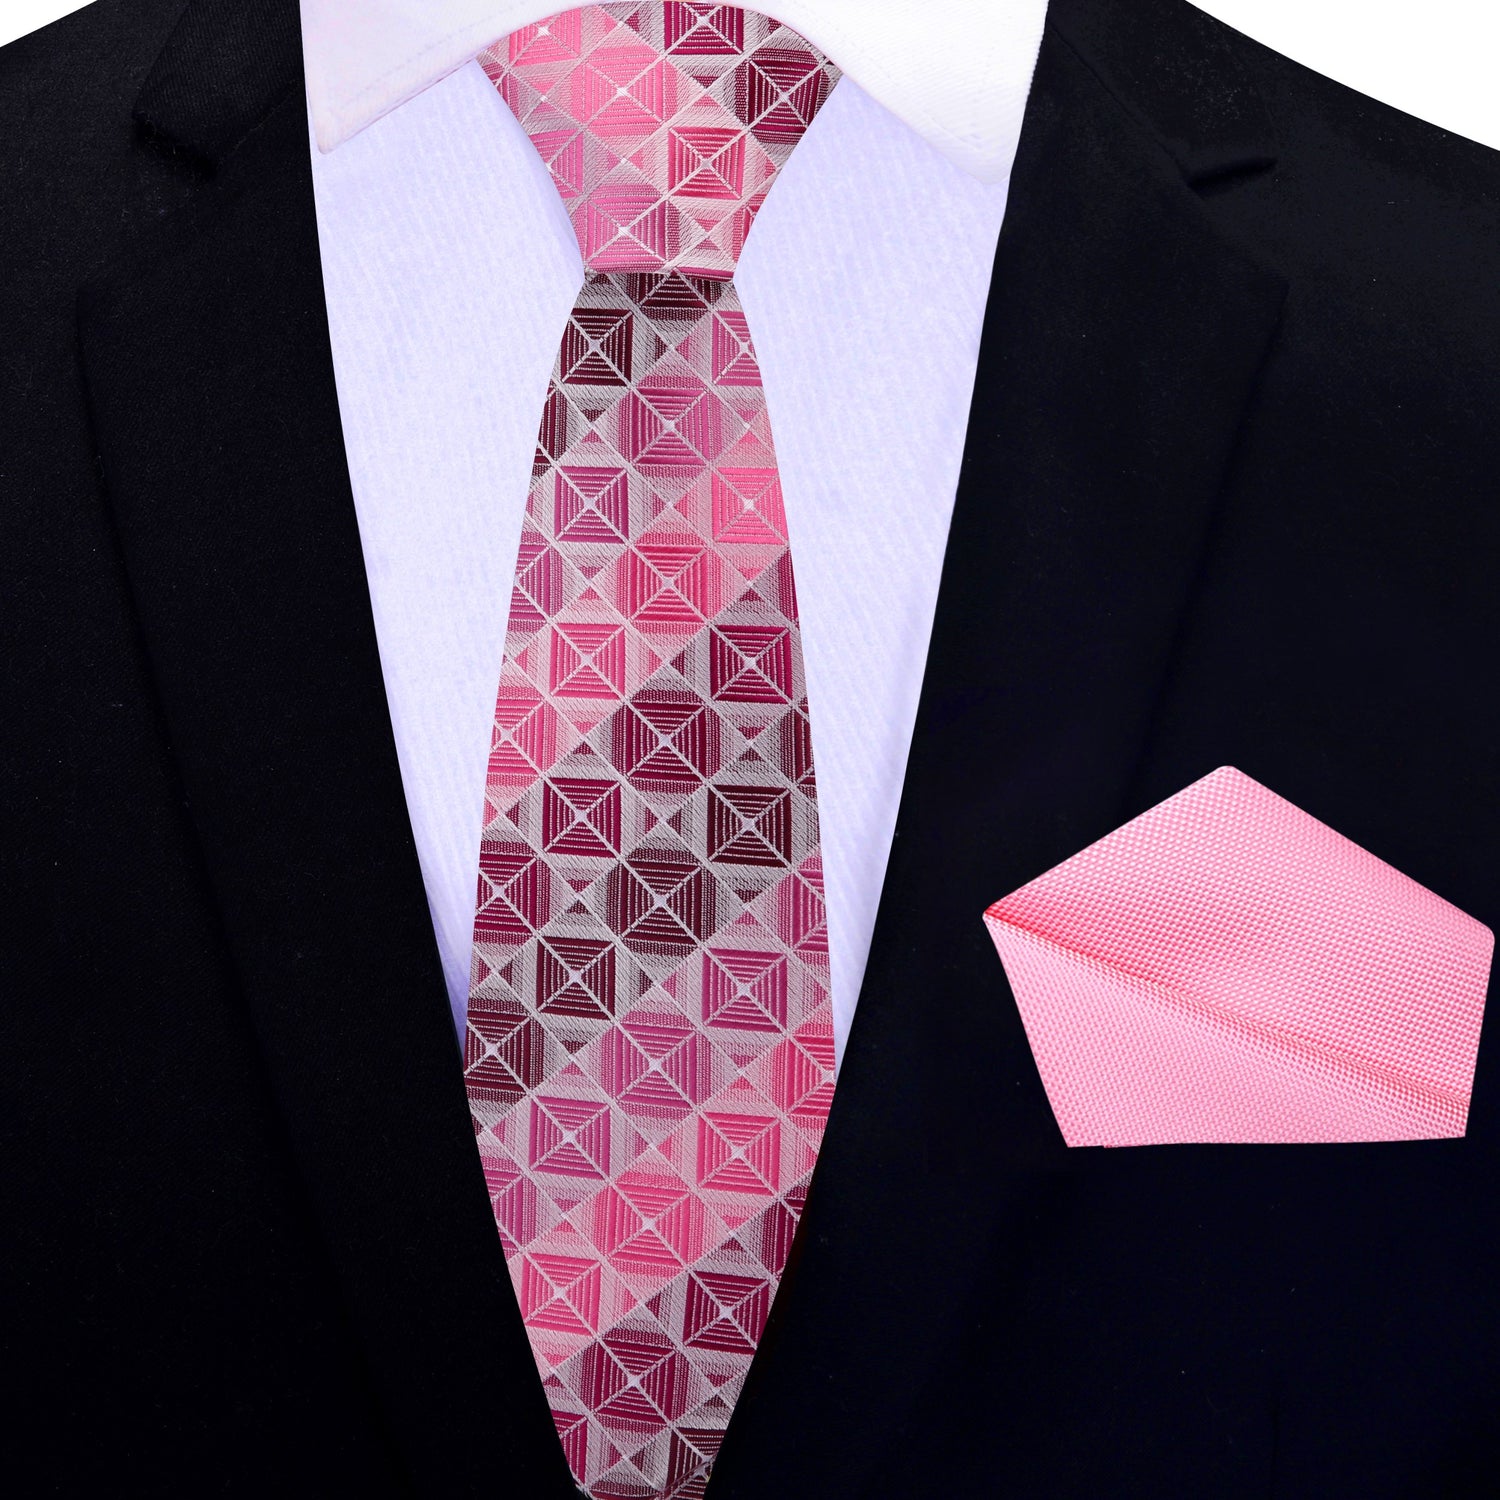 Thin Tie: Shades of Pink and Red Geometric Blocks Necktie and Pink Pocket Square